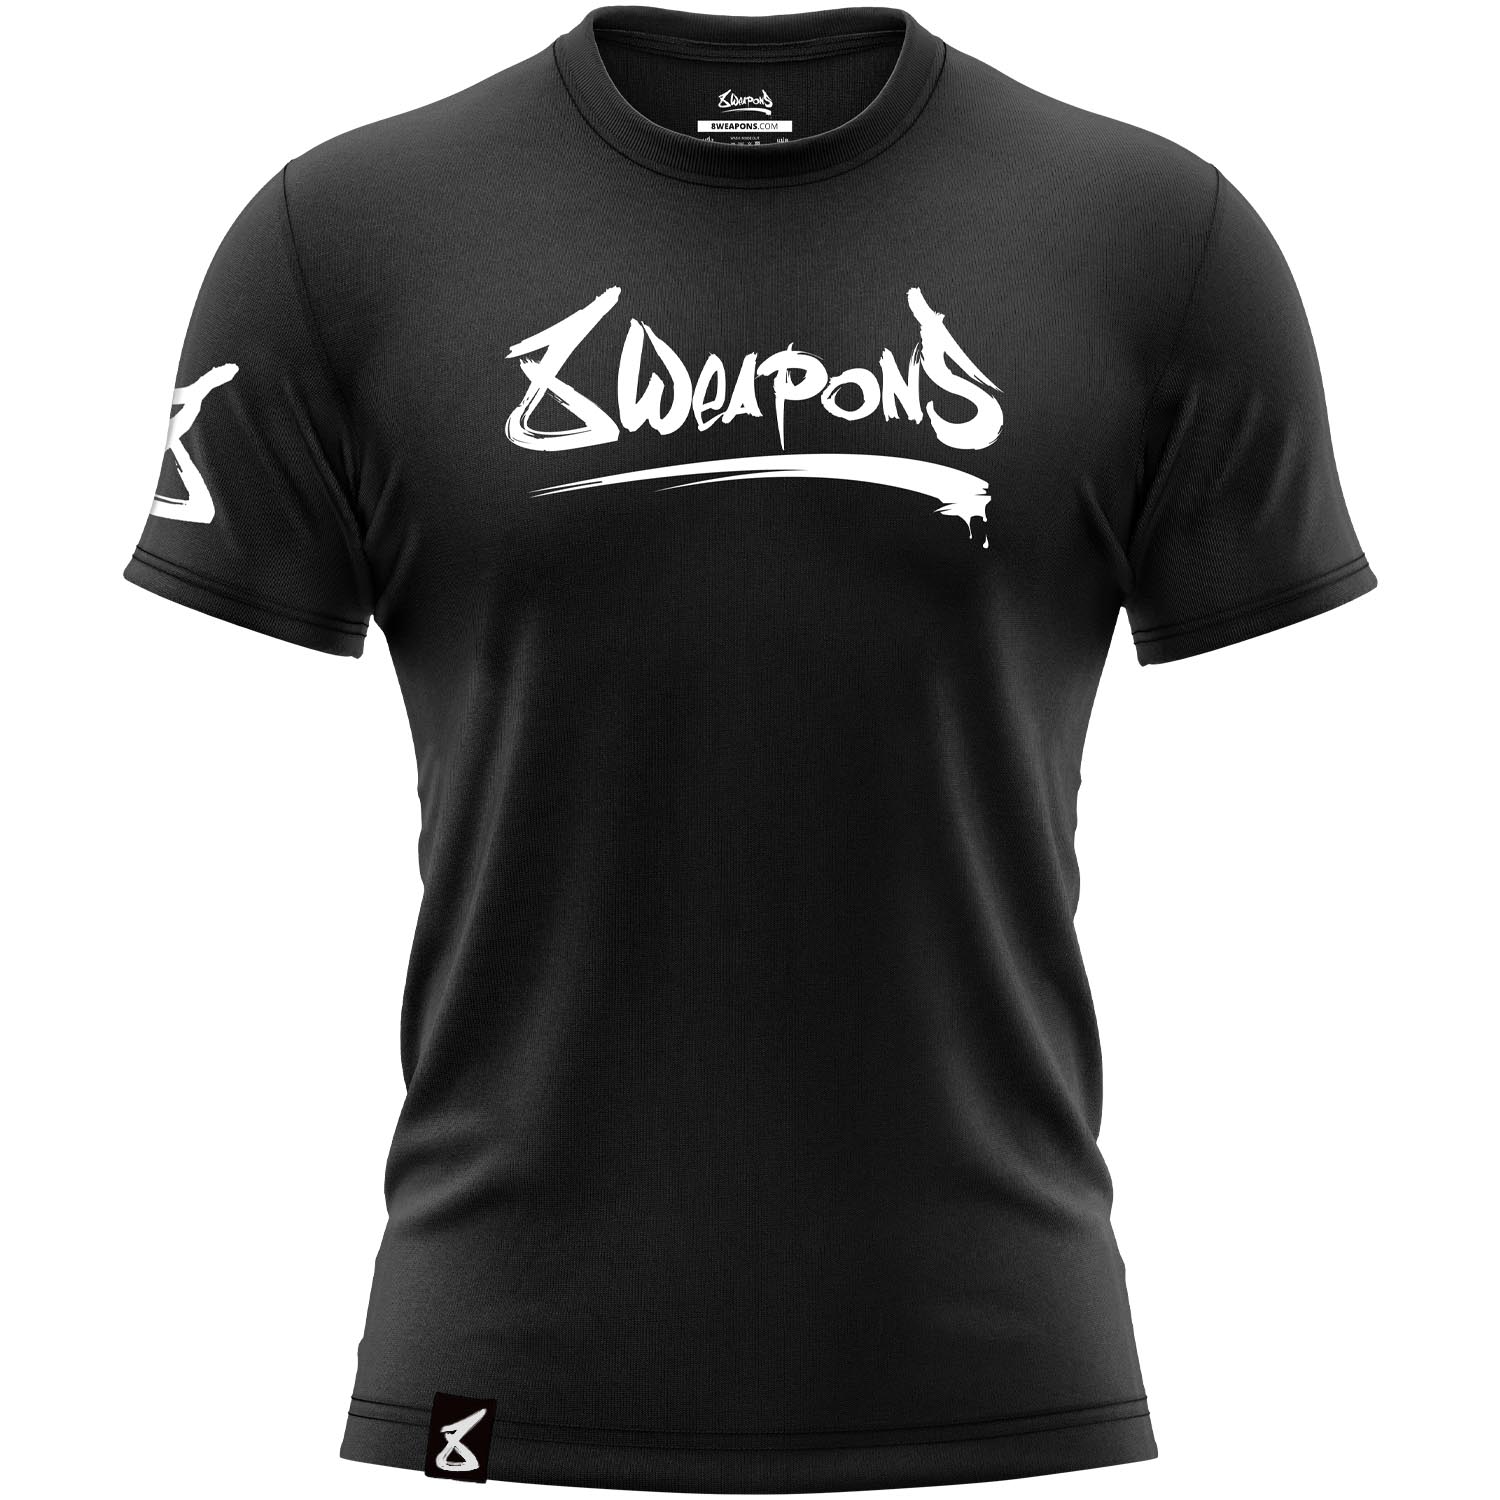 8 WEAPONS T-Shirt, Unlimited 2.0, black-white